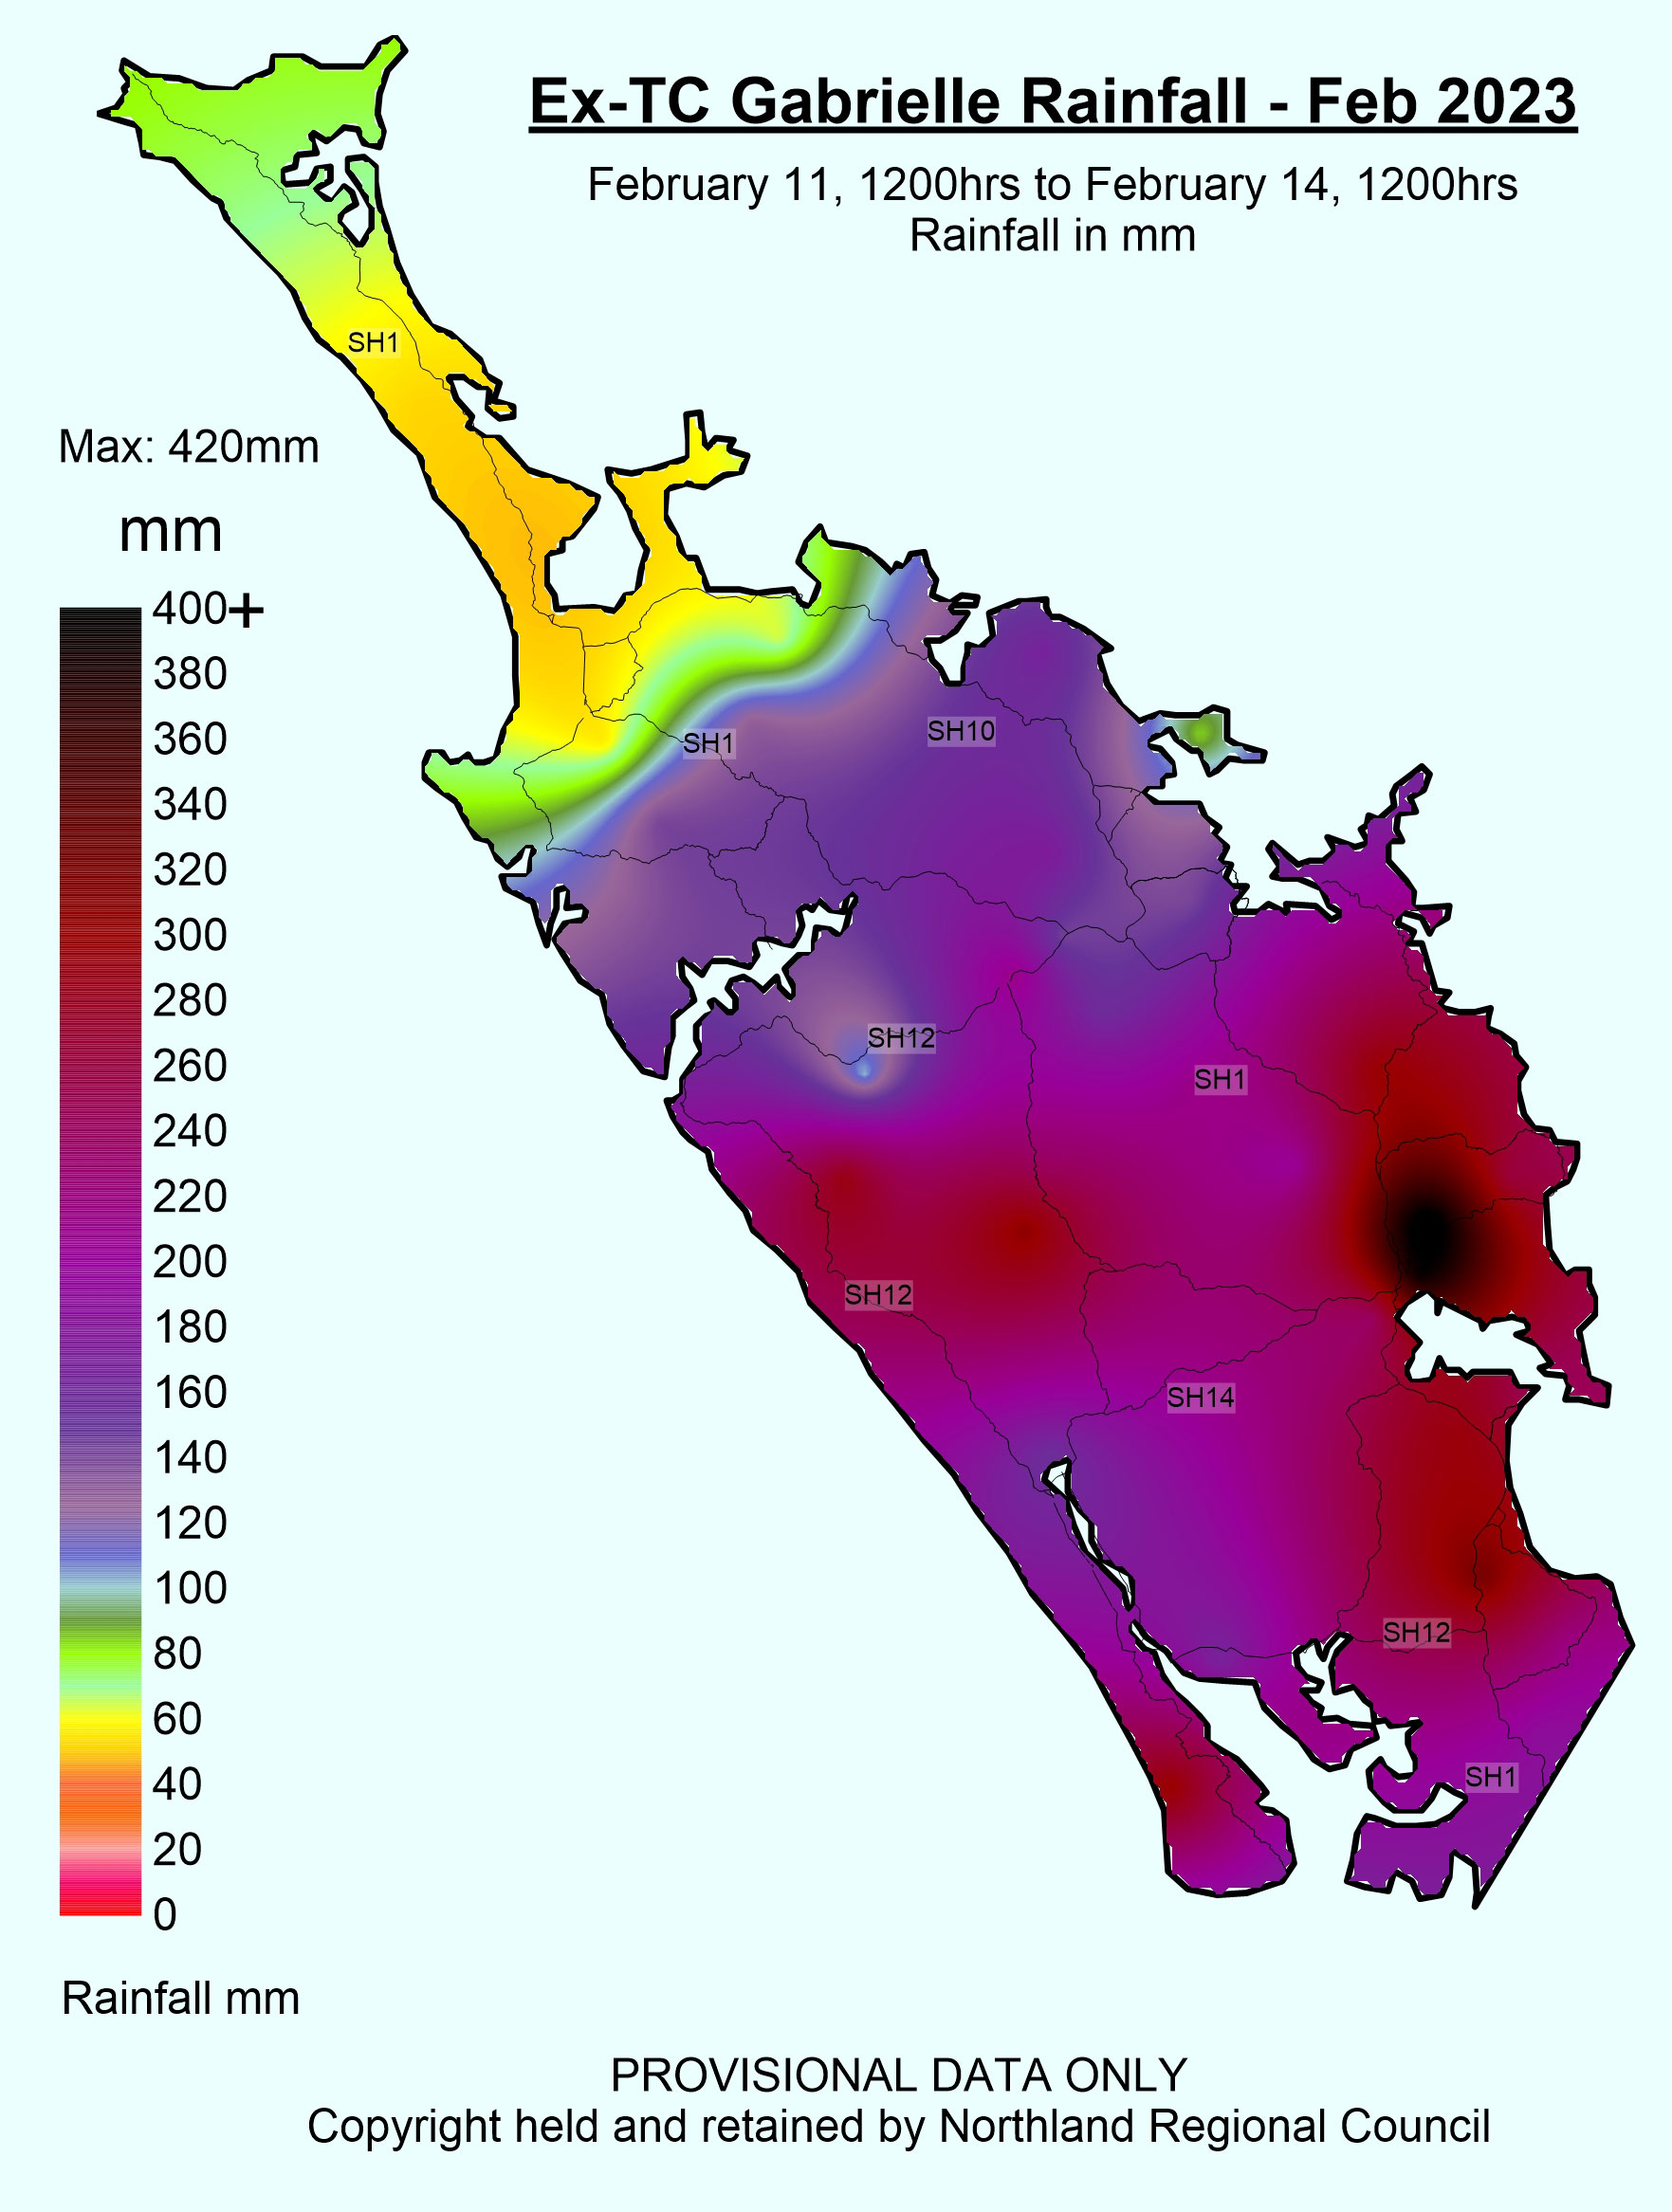 Rainfall map for Northland, showing accumulated rainfall totals from 11 February 12:00 to 14 February 12:00 (72 hours)